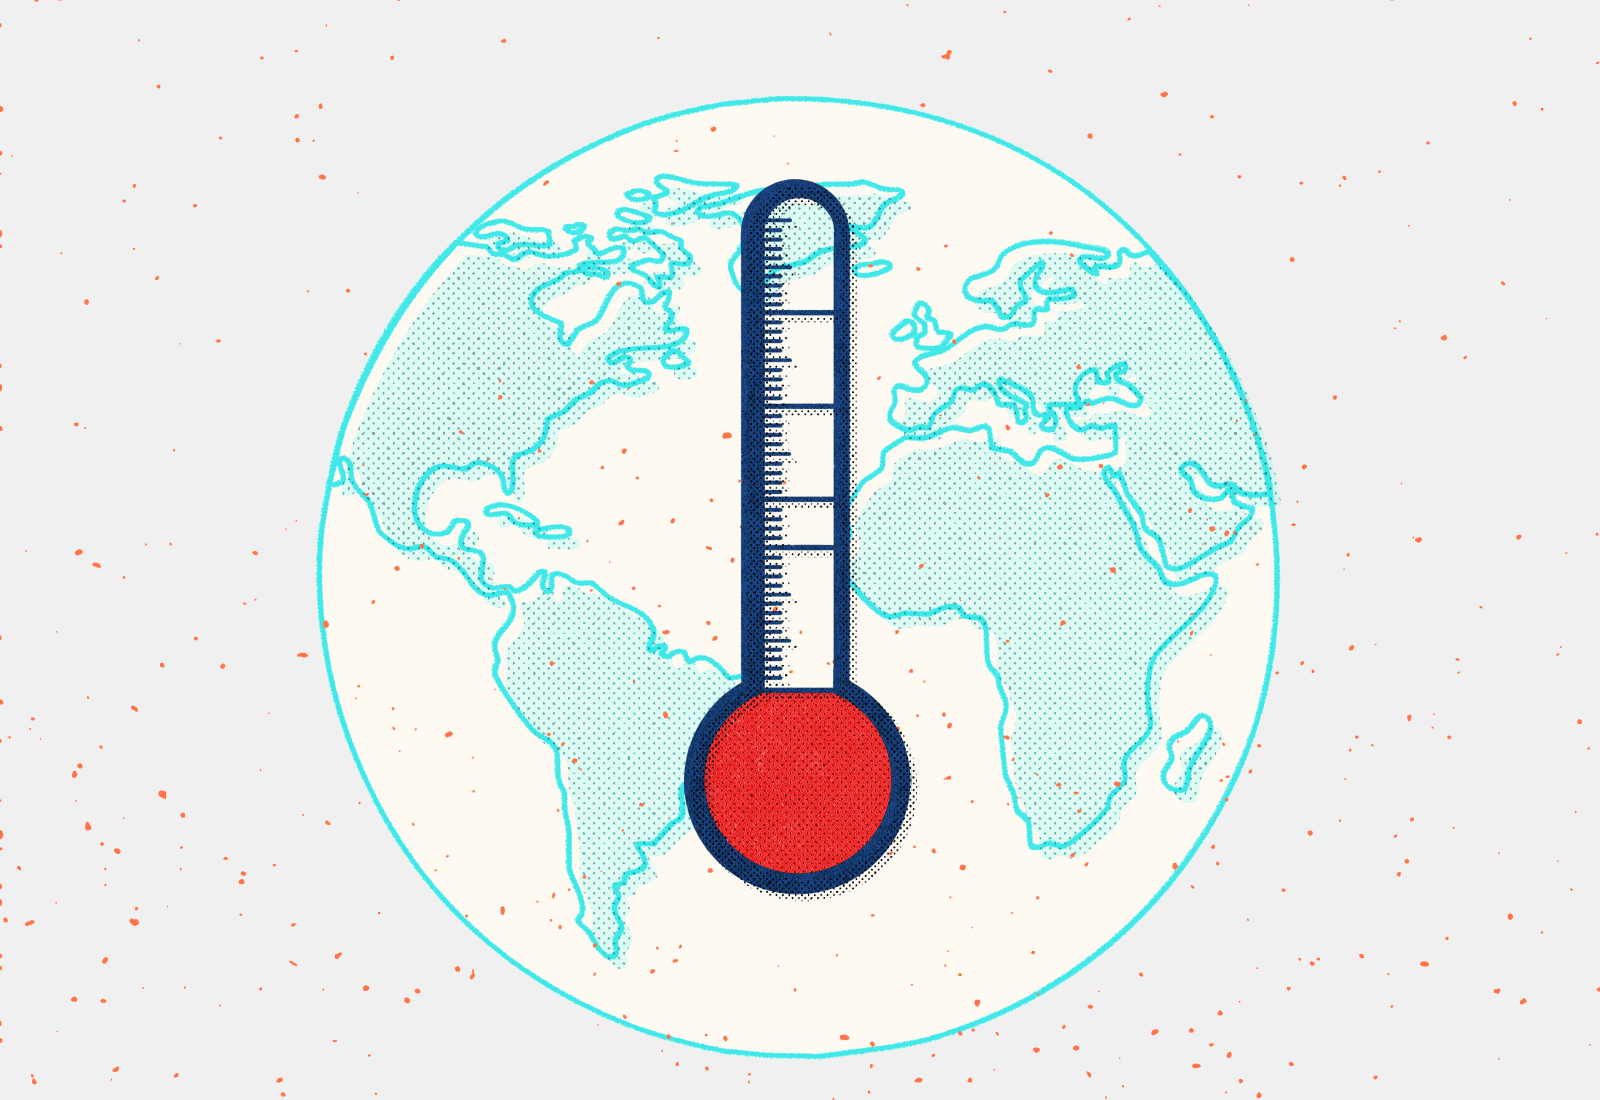 animated illustration of a thermometer climbing from 0 to 1.5, 2, 3, and then 4 degrees celsius with drawn Earth in the background